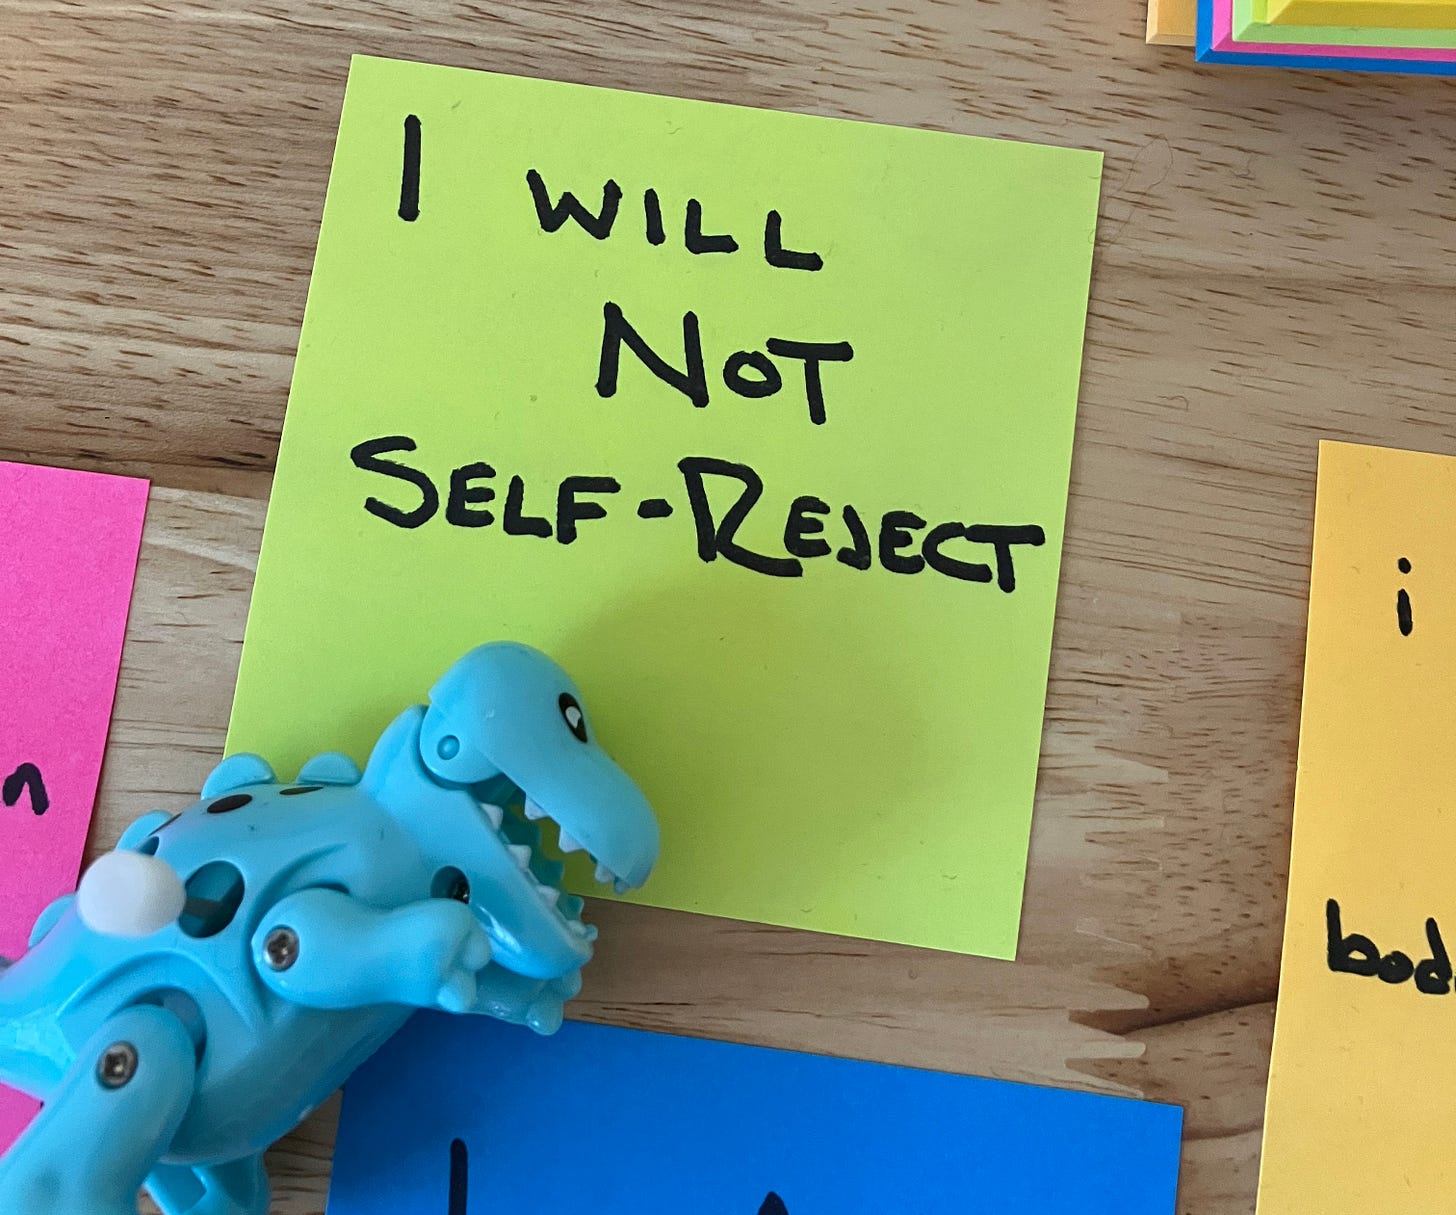 A neon green post-it note on a wood grain background. The post-it reads "I WILL NOT SELF-REJECT" in sharpie. Laid over the post-it note is a light blue wind up dinosaur toy.